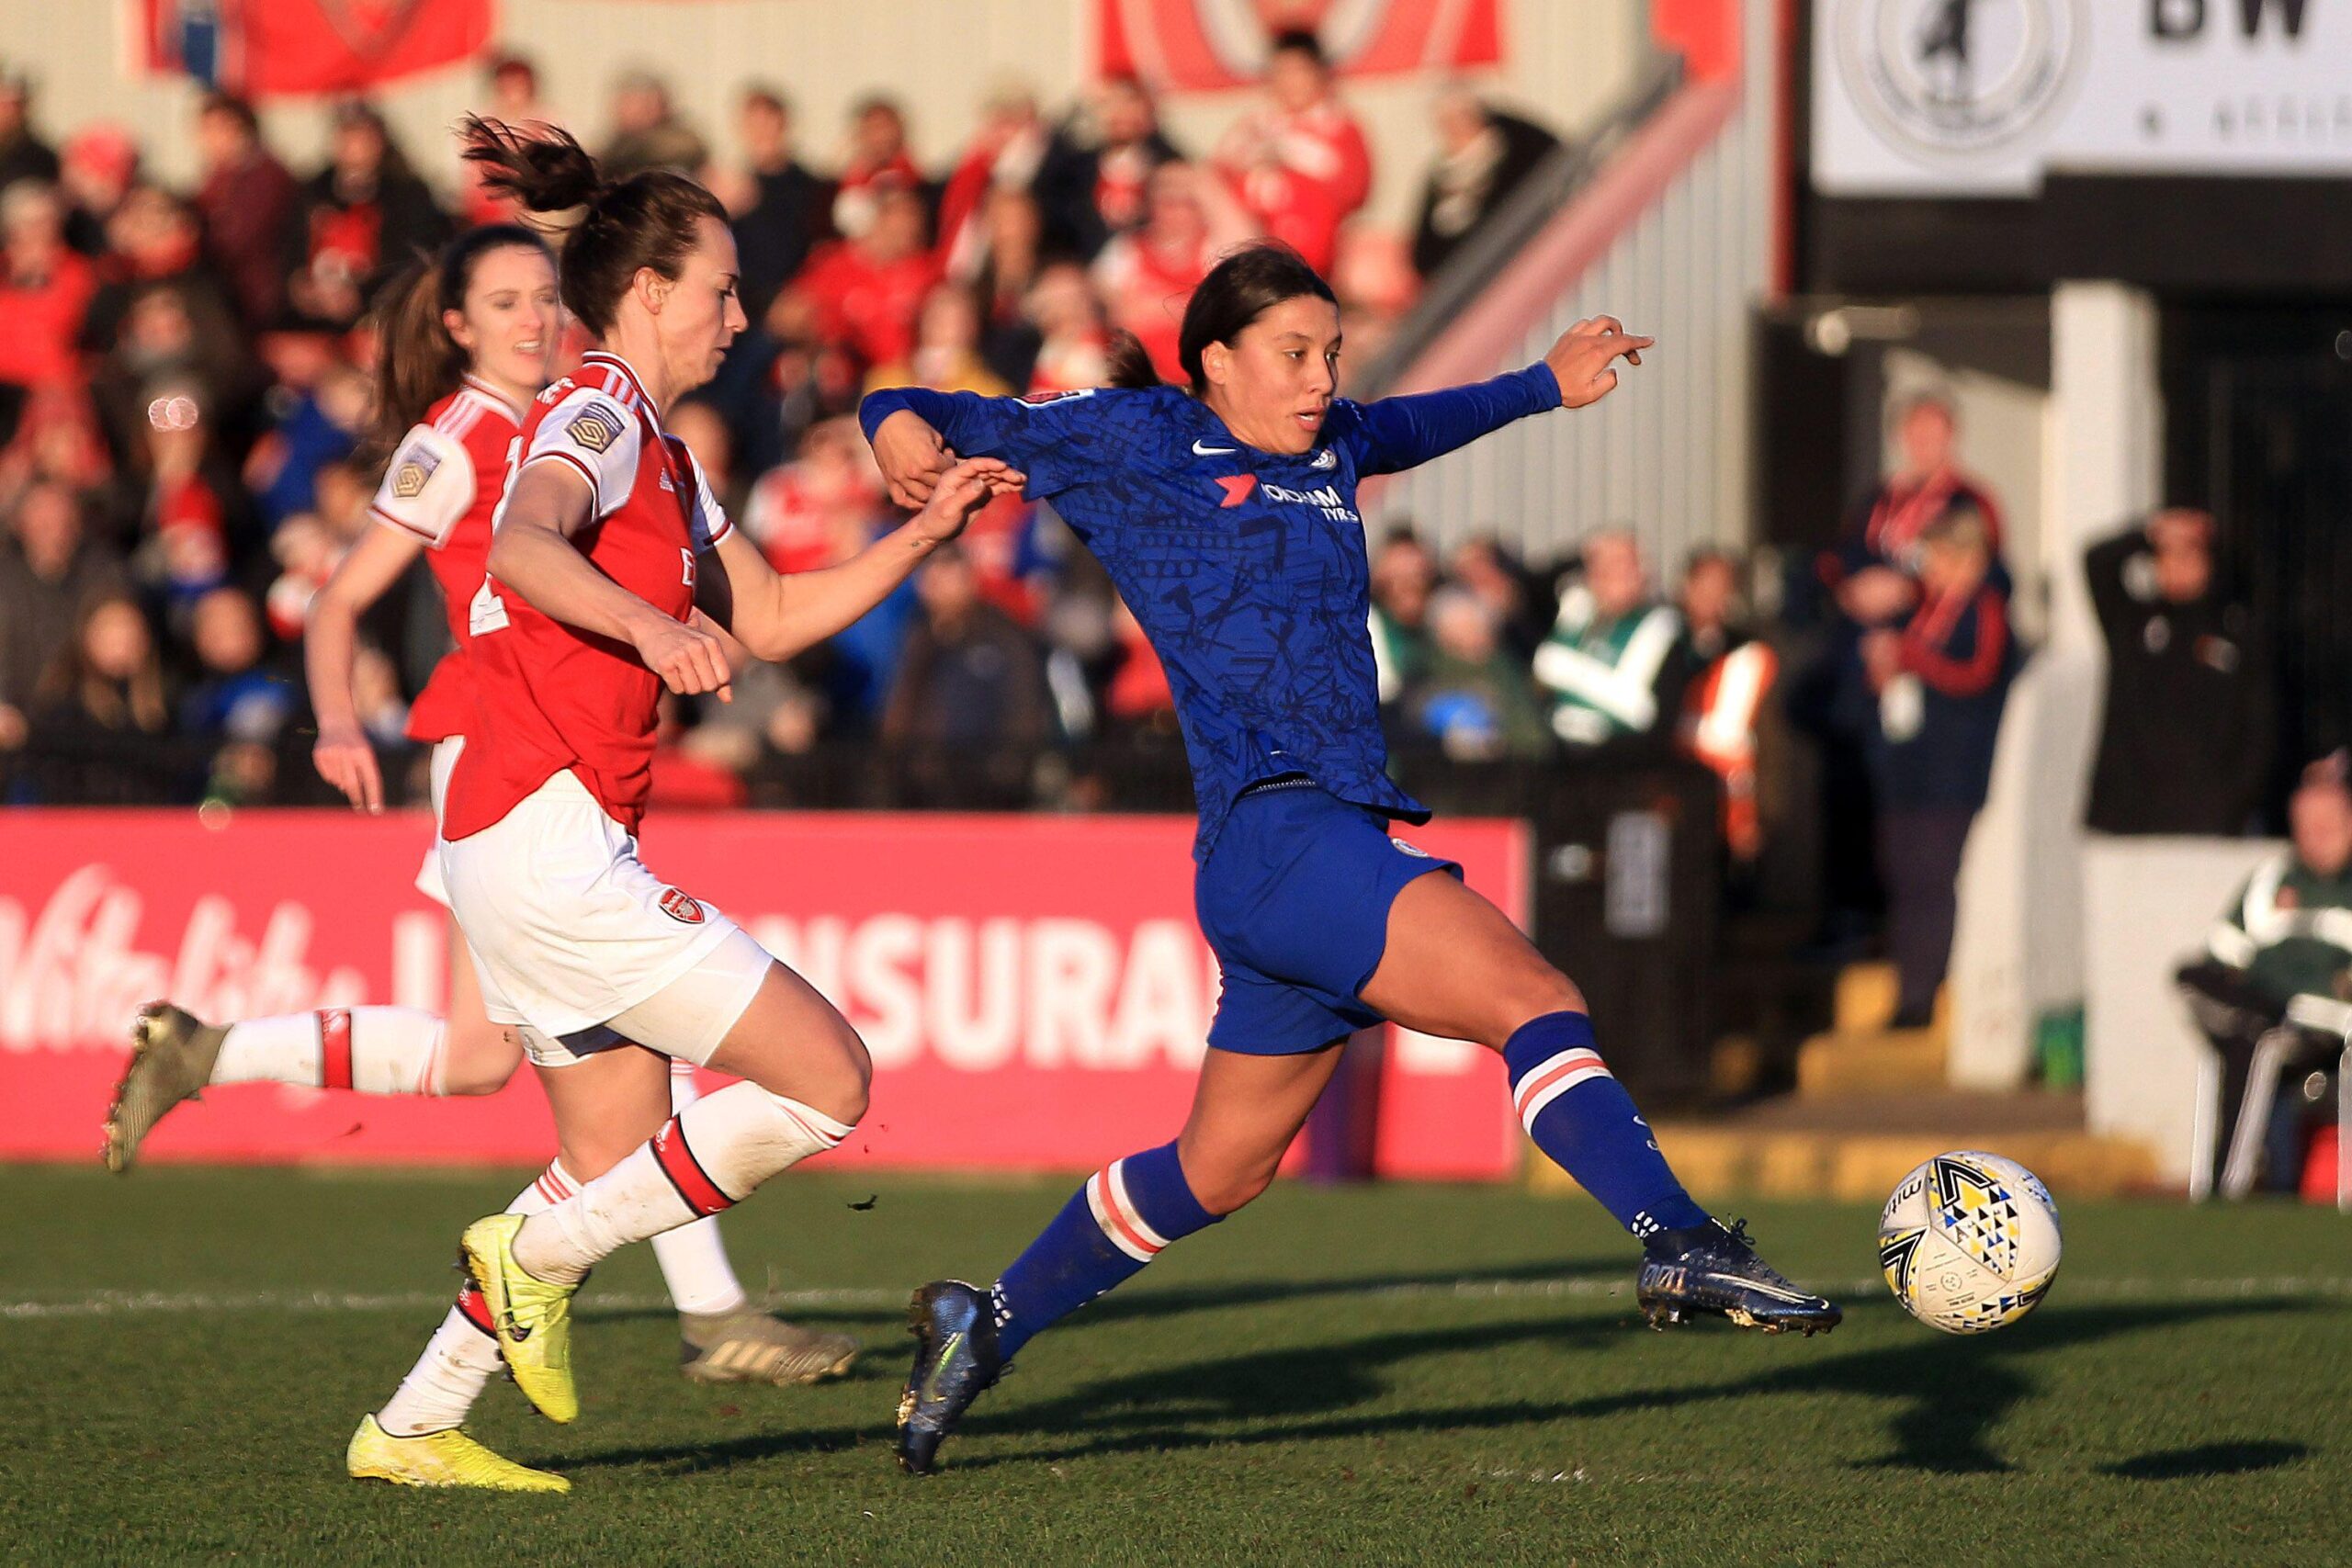 Women’s football; record crowds and soaring popularity – here’s how to keep it this way